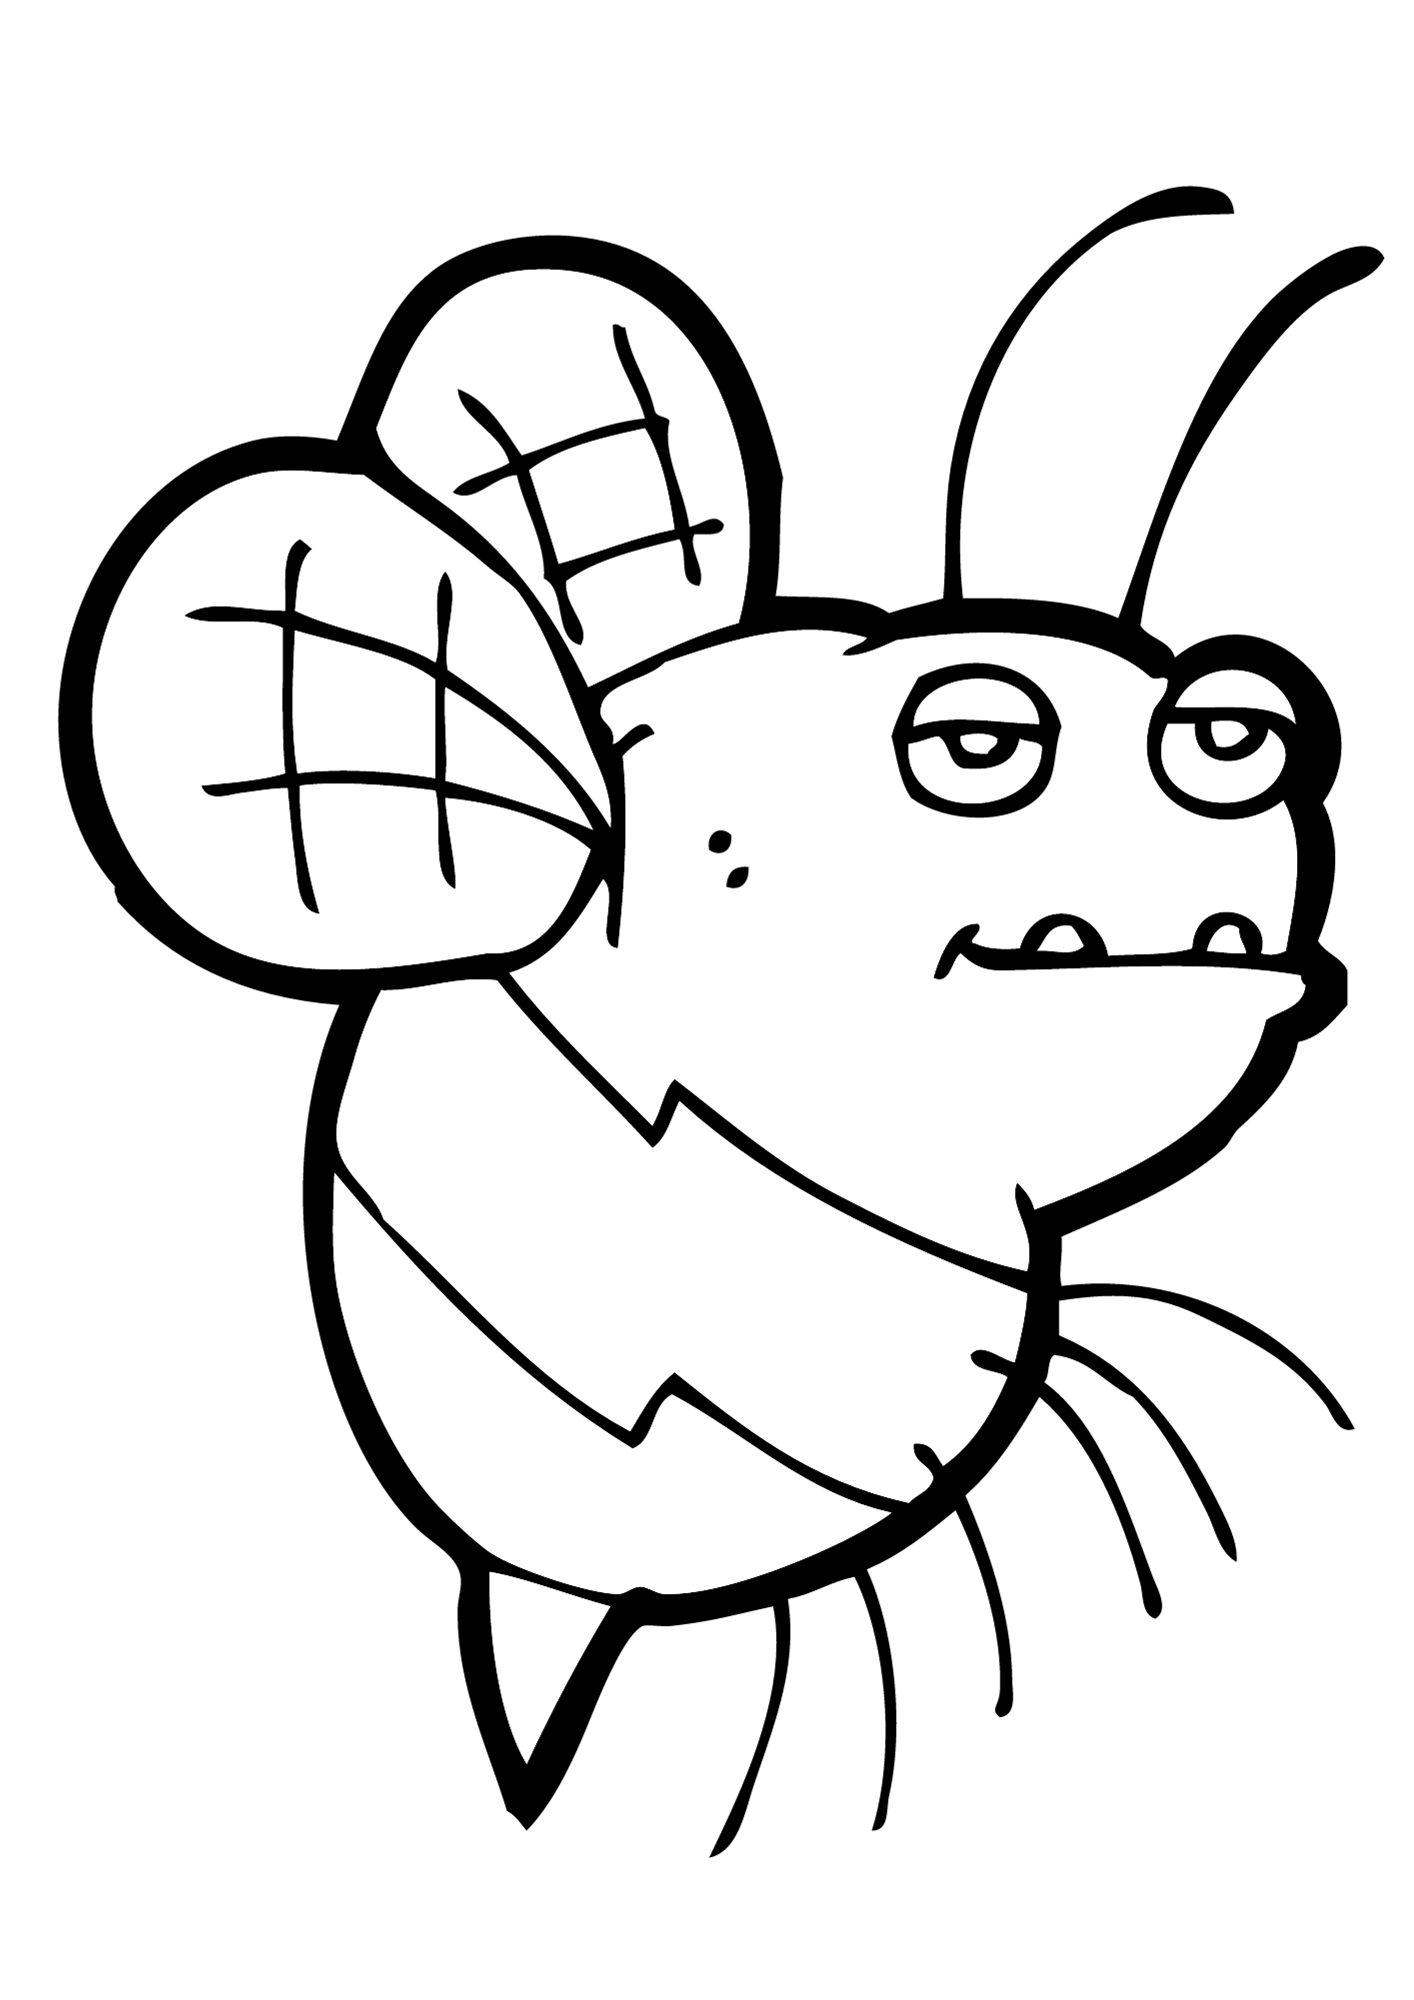 Fly Insect Coloring Pages